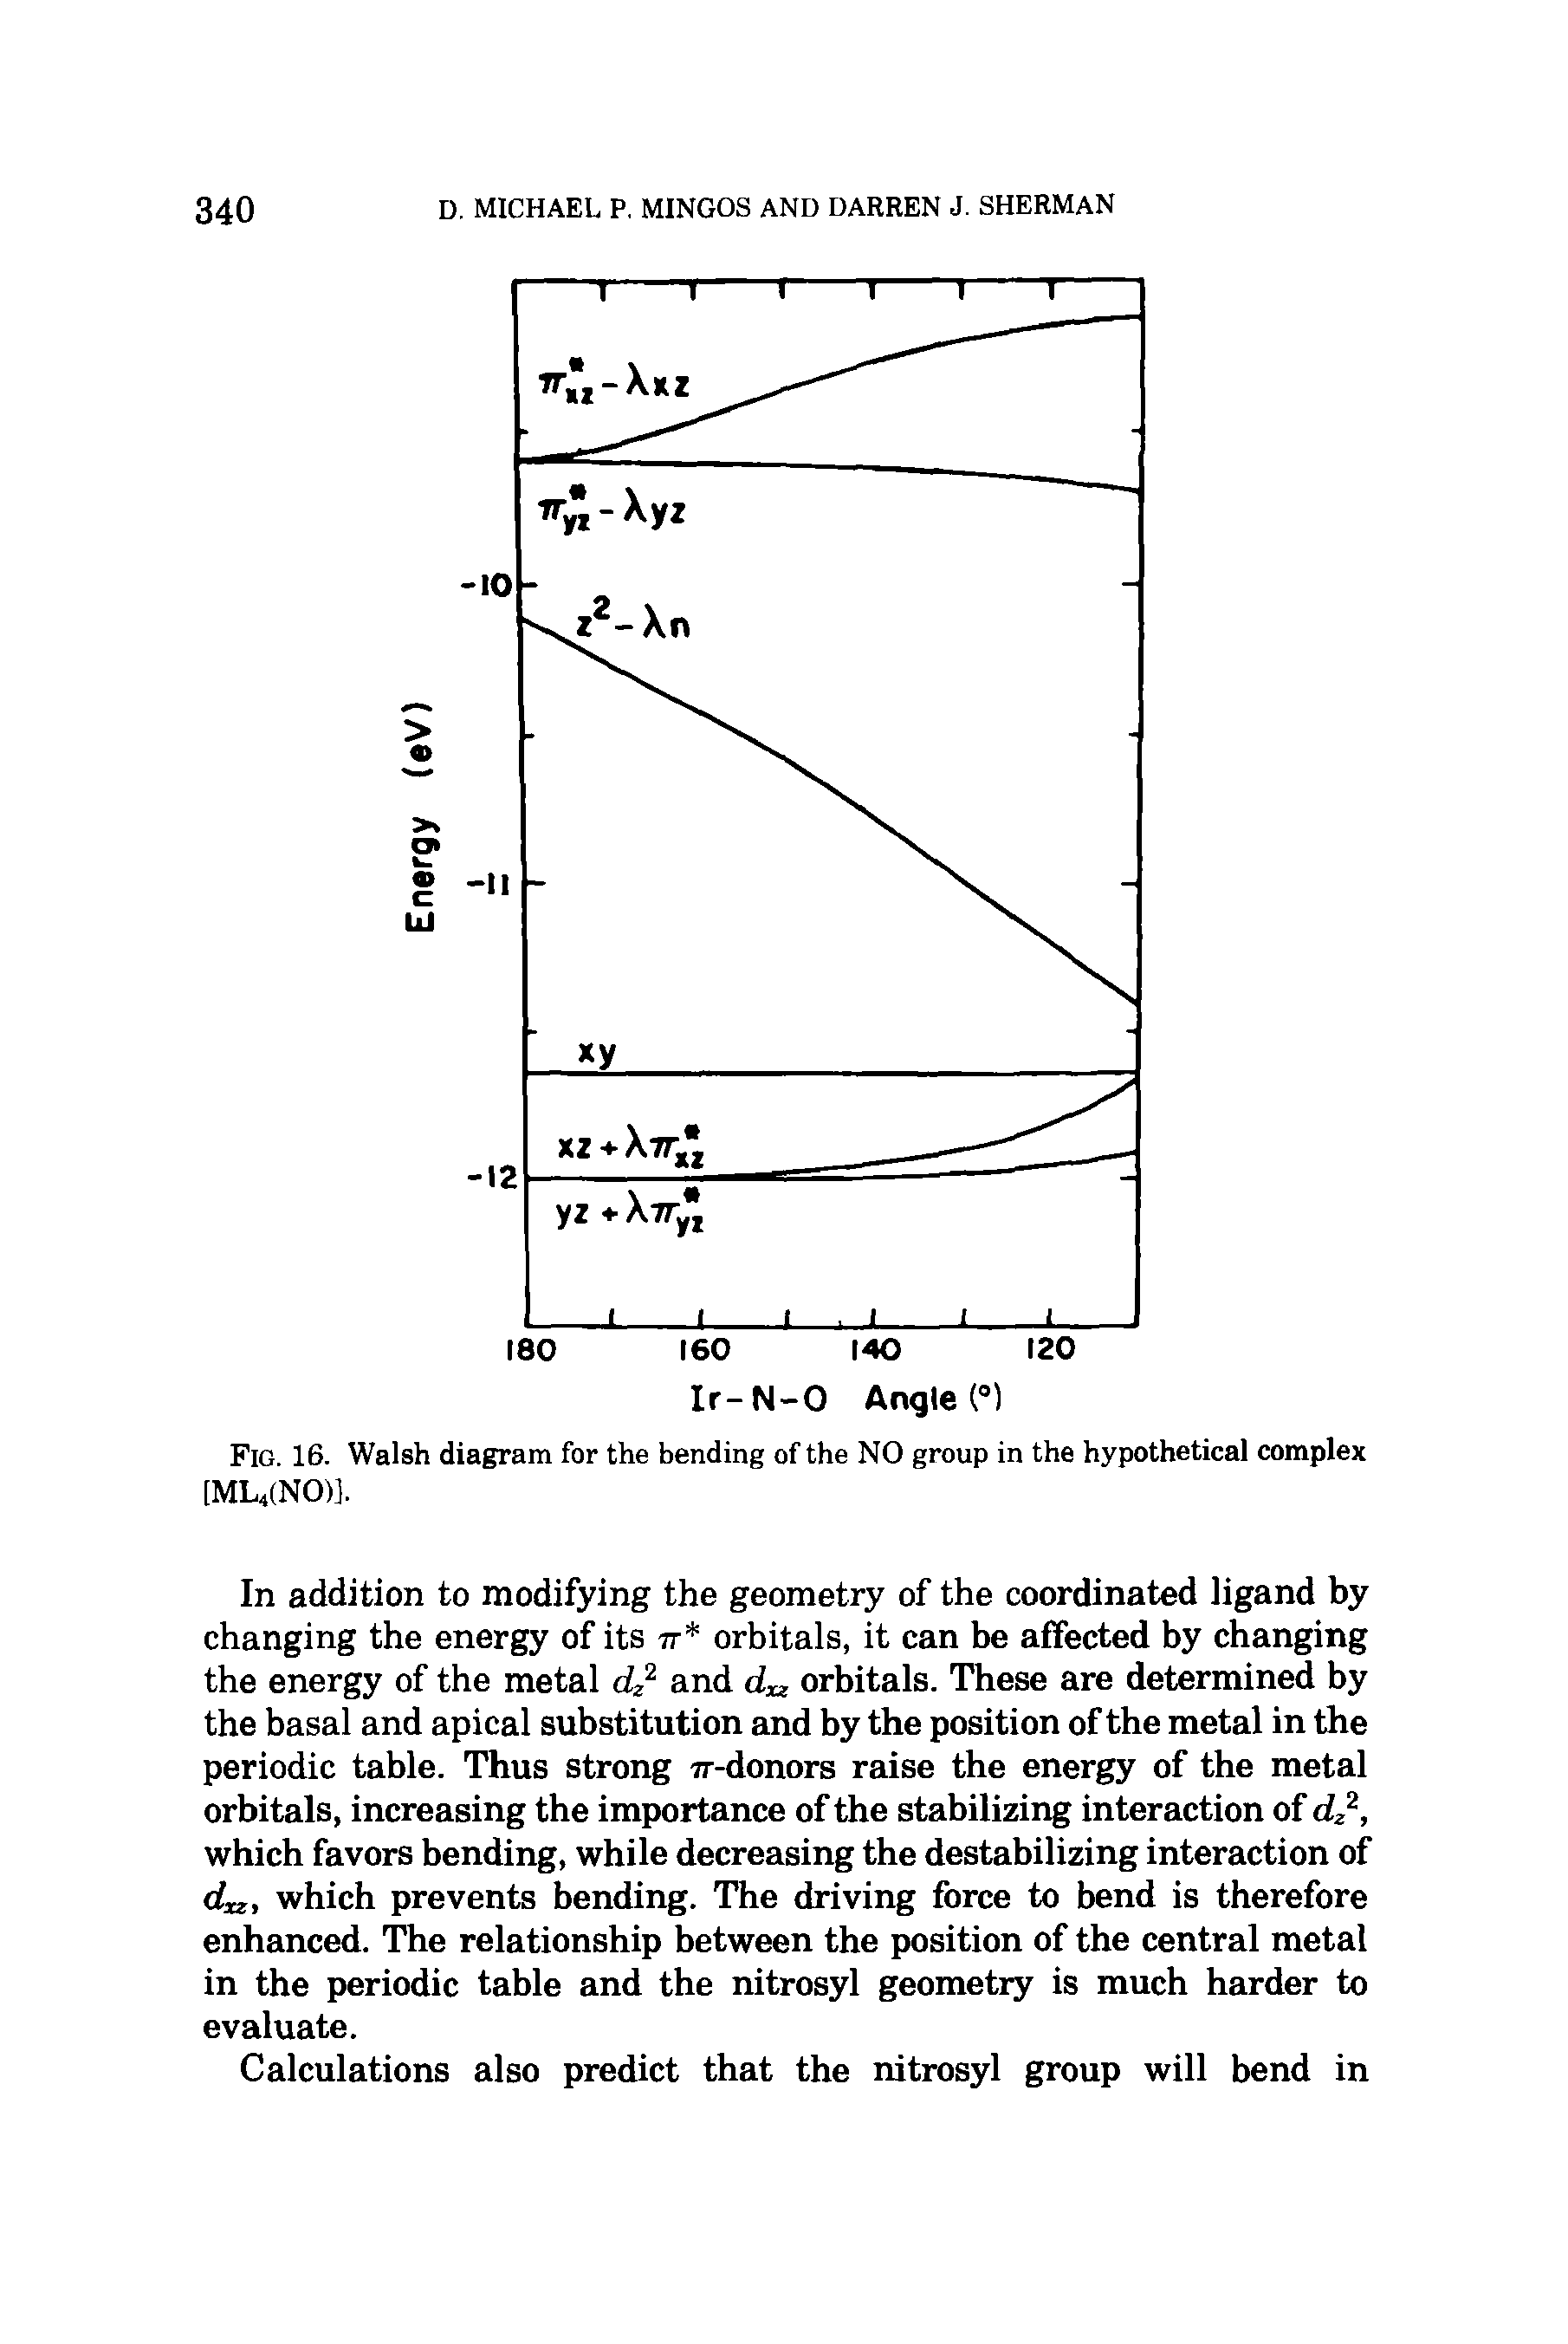 Fig. 16. Walsh diagram for the bending of the NO group in the hypothetical complex [ML4(N0)].